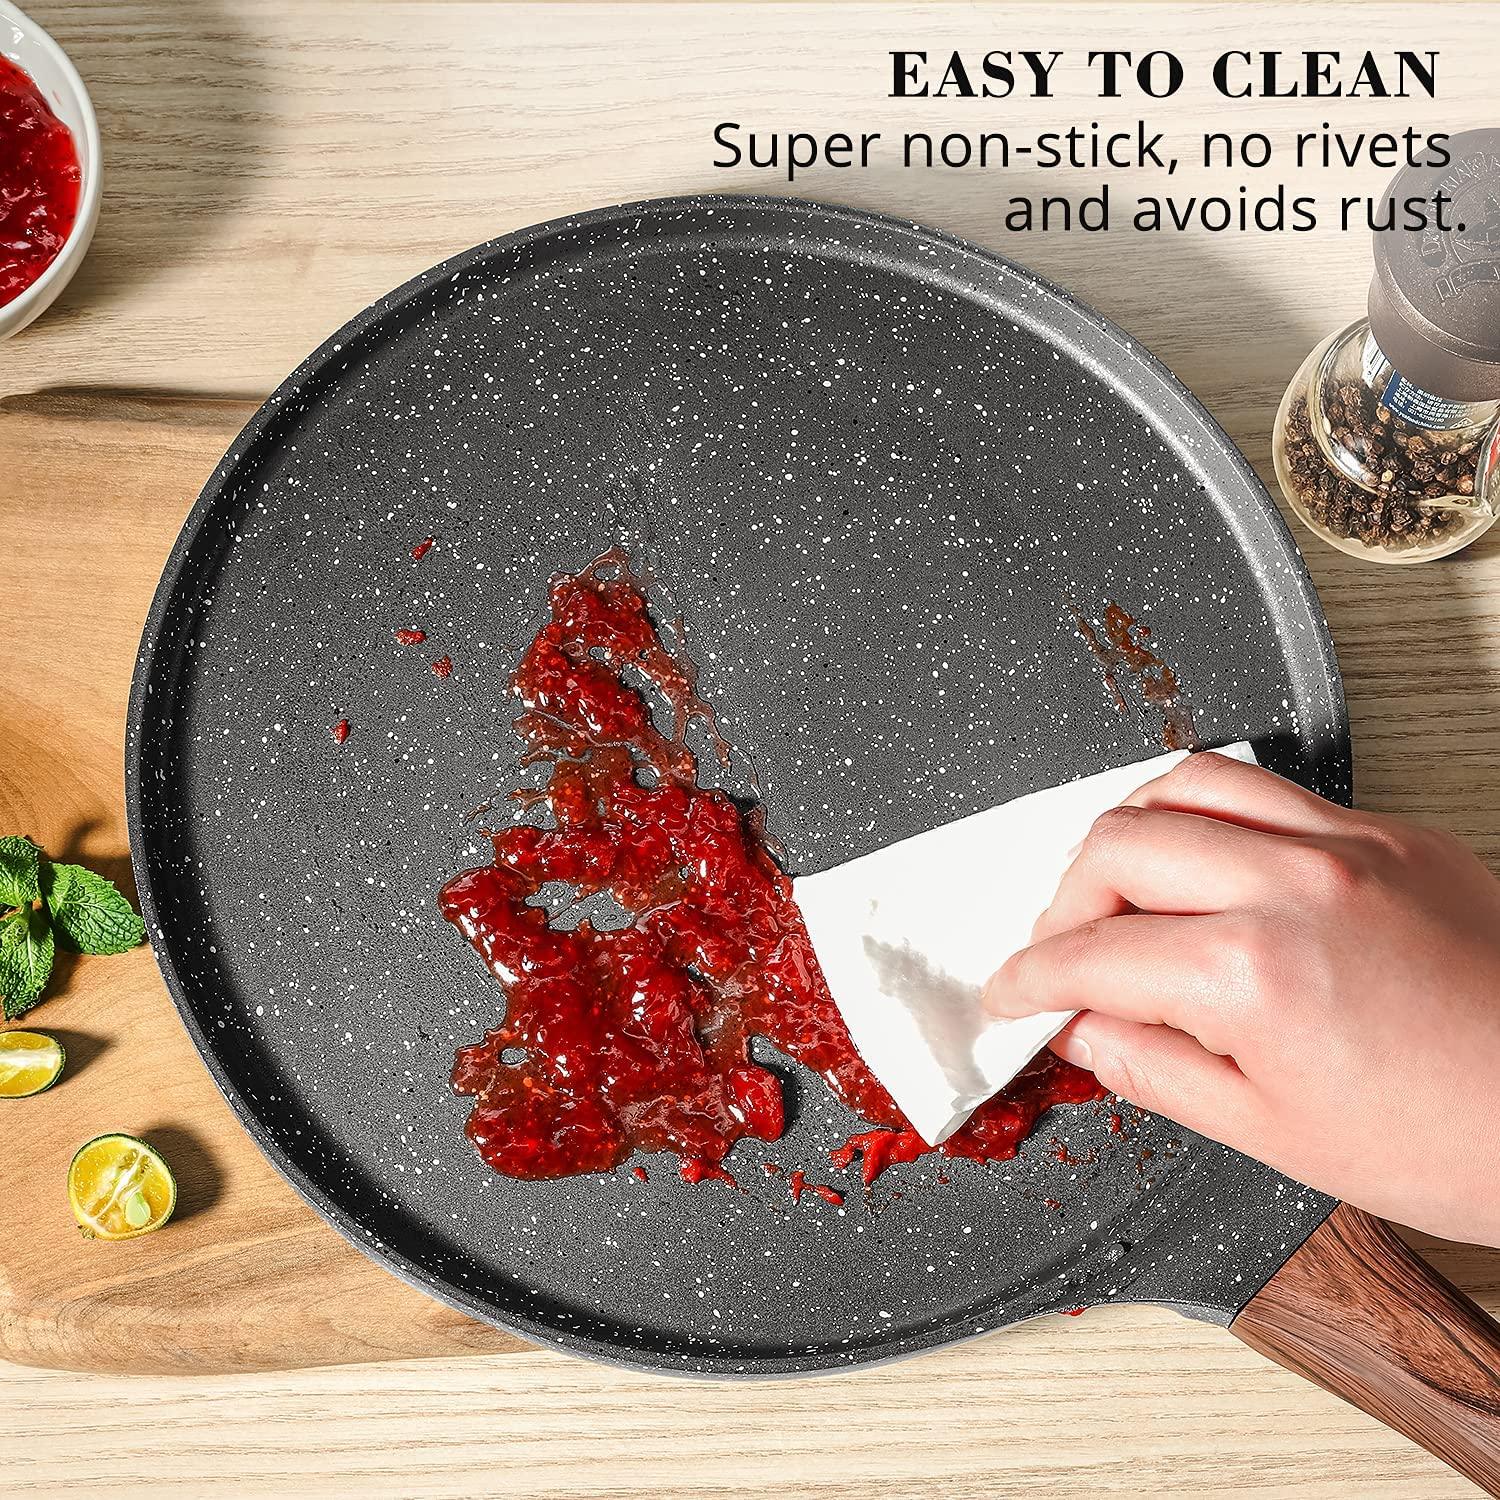 SENSARTE Nonstick Crepe Pan, Swiss Granite Coating Dosa Pan Pancake Flat Skillet Tawa Griddle 12-Inch with Stay-Cool Handle, Induction Compatible, PFOA Free - CookCave